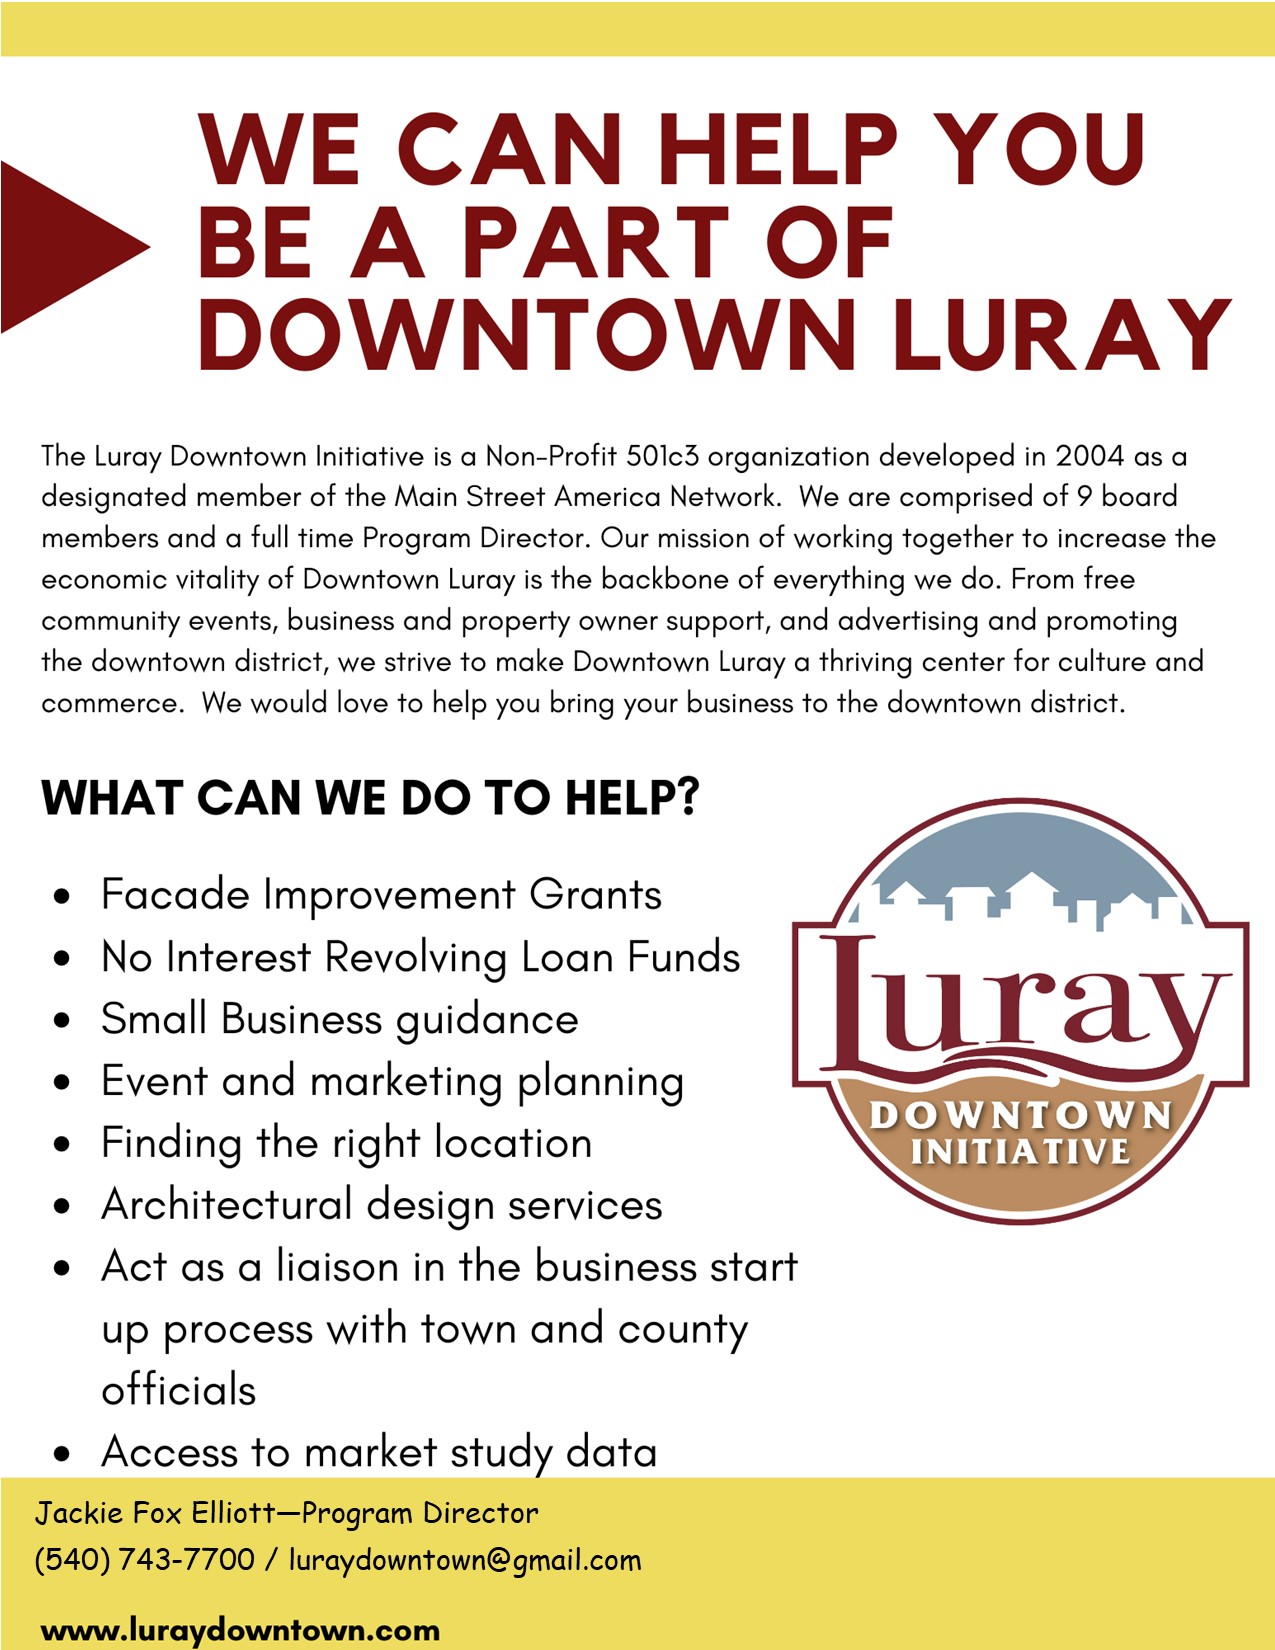 Be part of downtown Luray